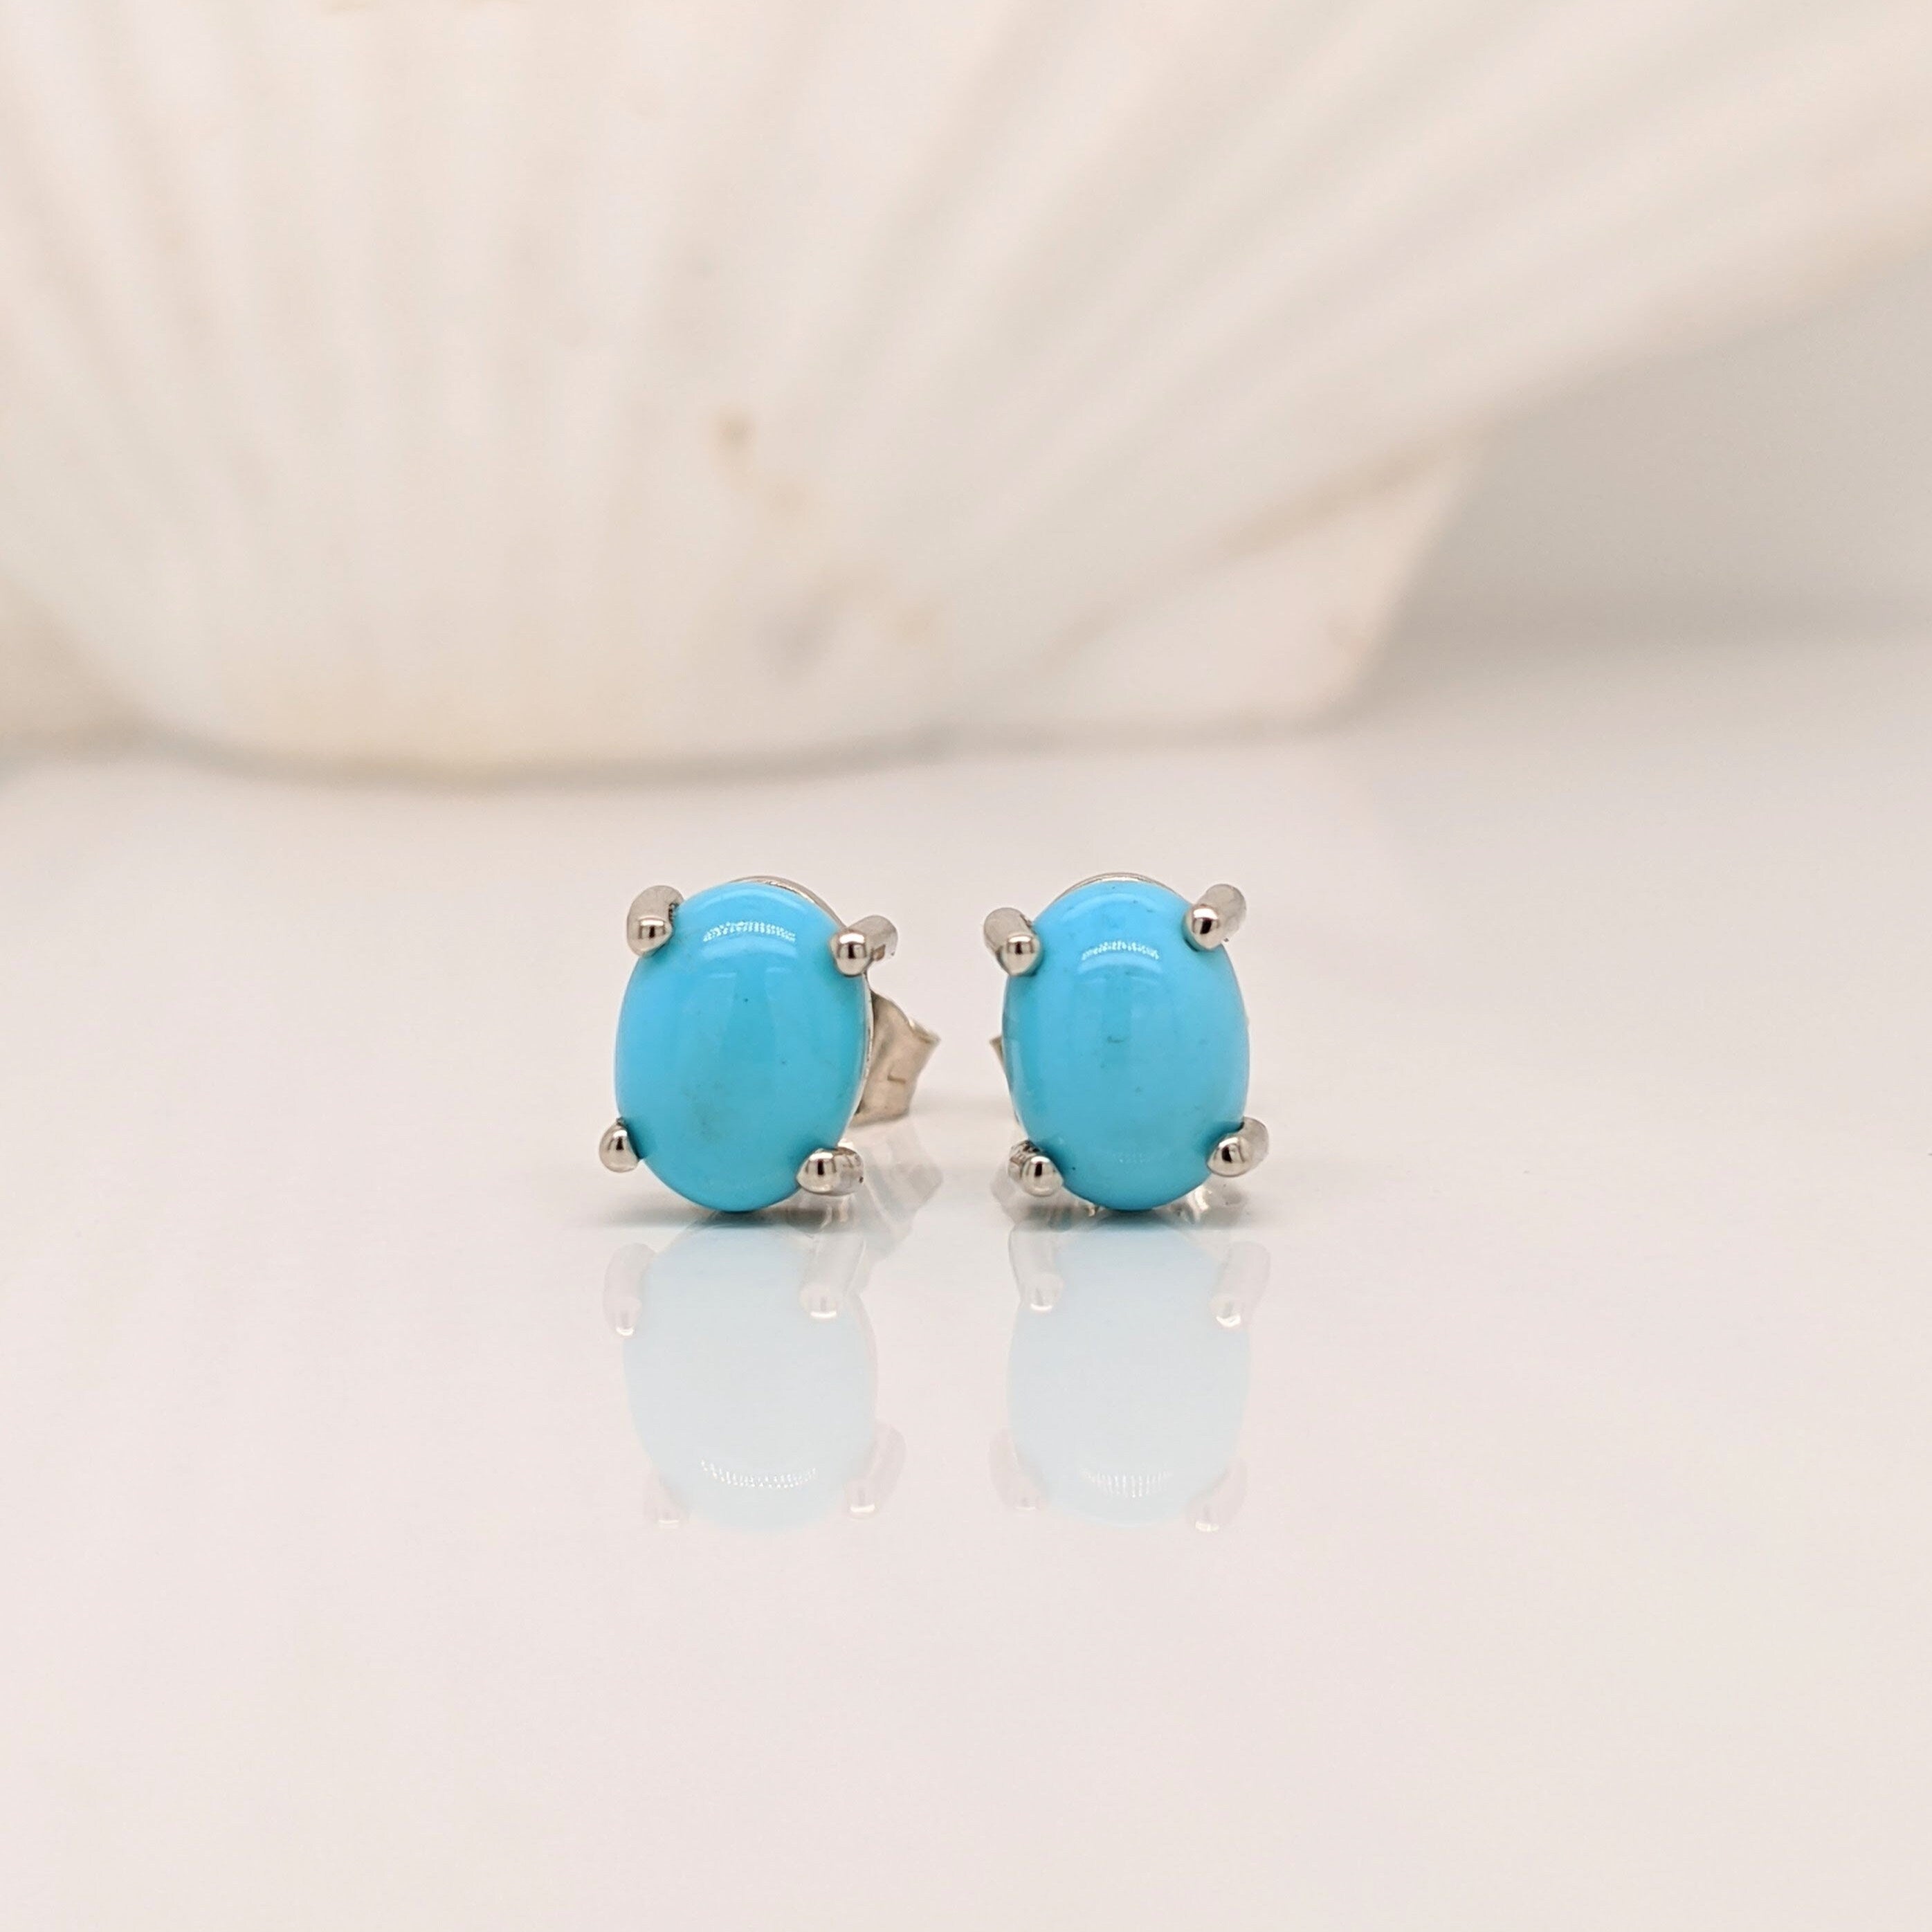 Cute Turquoise Earrings in Solid 14k Gold with Push Back Closures | Oval 8x6mm 7x5mm | Prong Setting | Cabochon Turquoise | Customizable